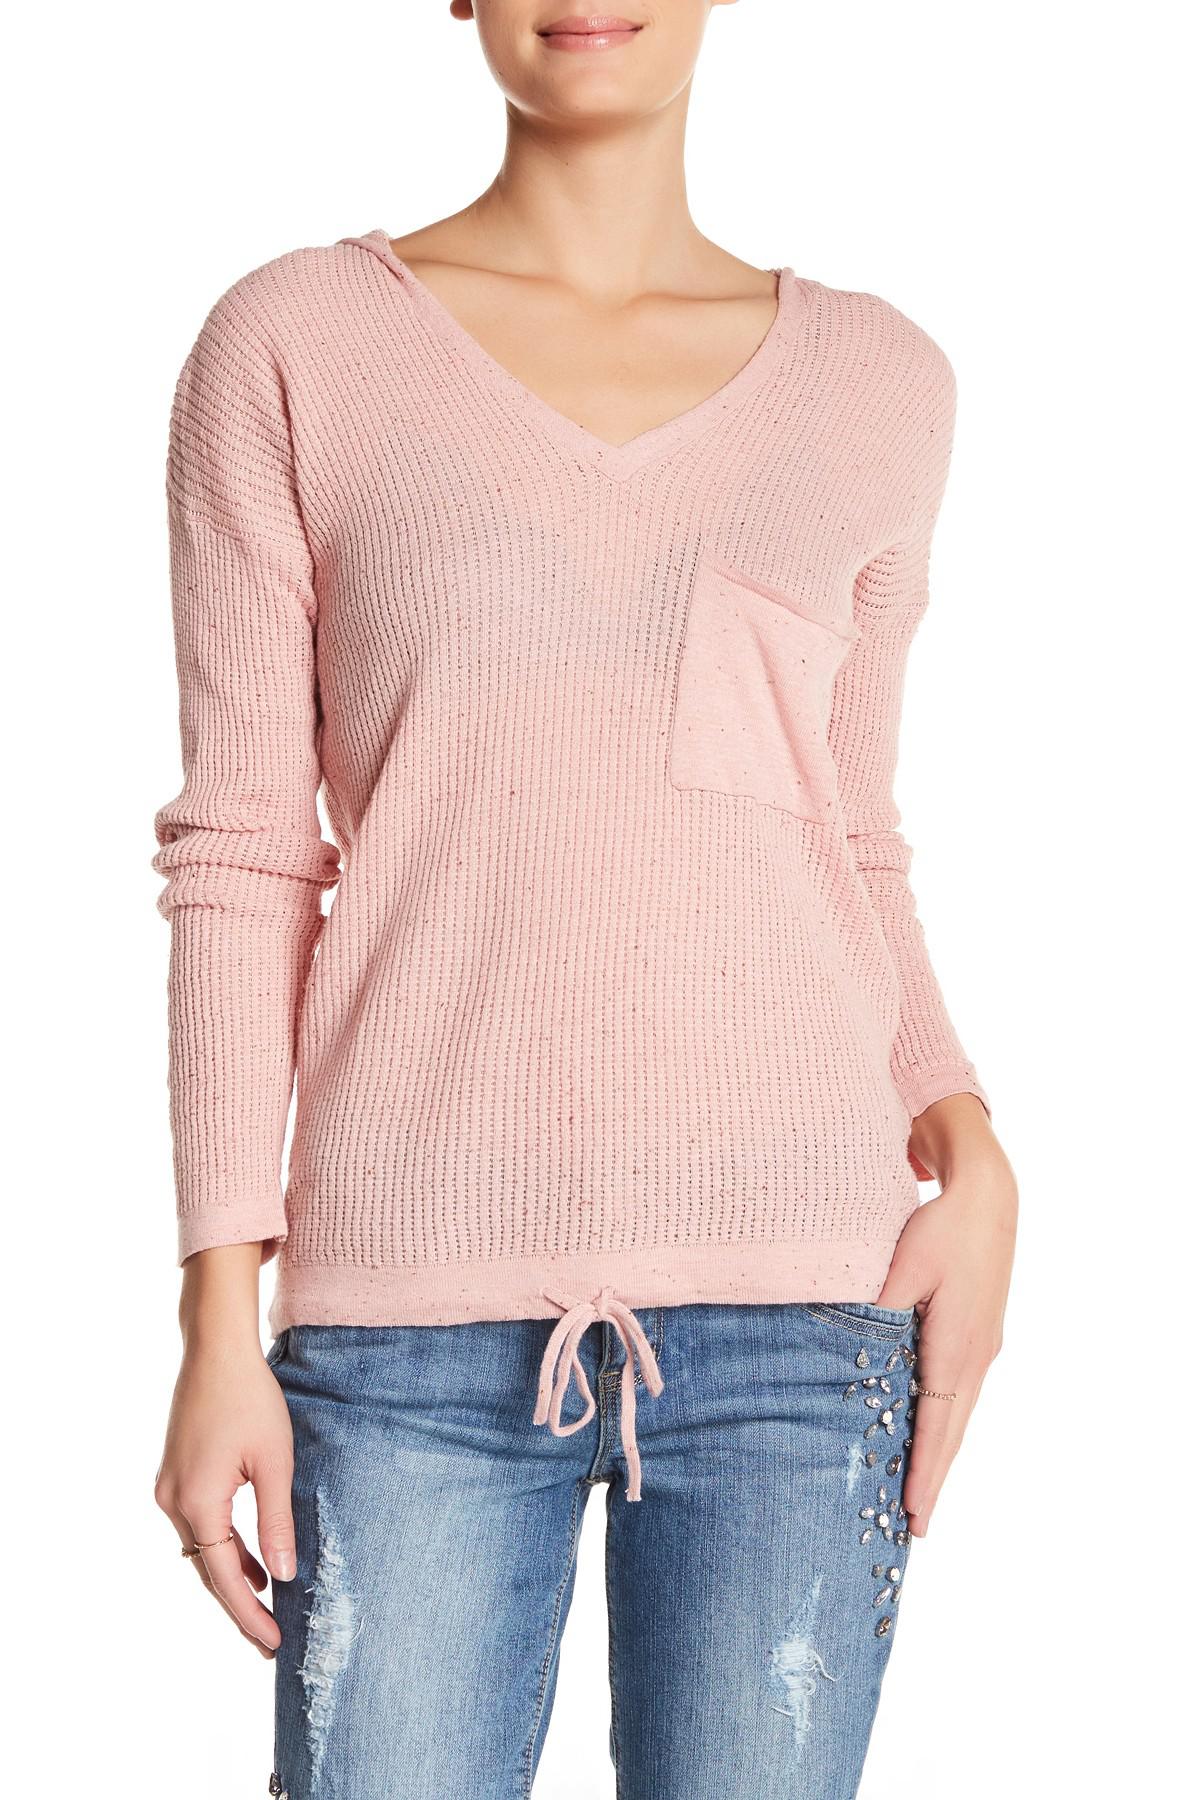 Democracy Hooded Knit V-neck Sweater in Pink | Lyst